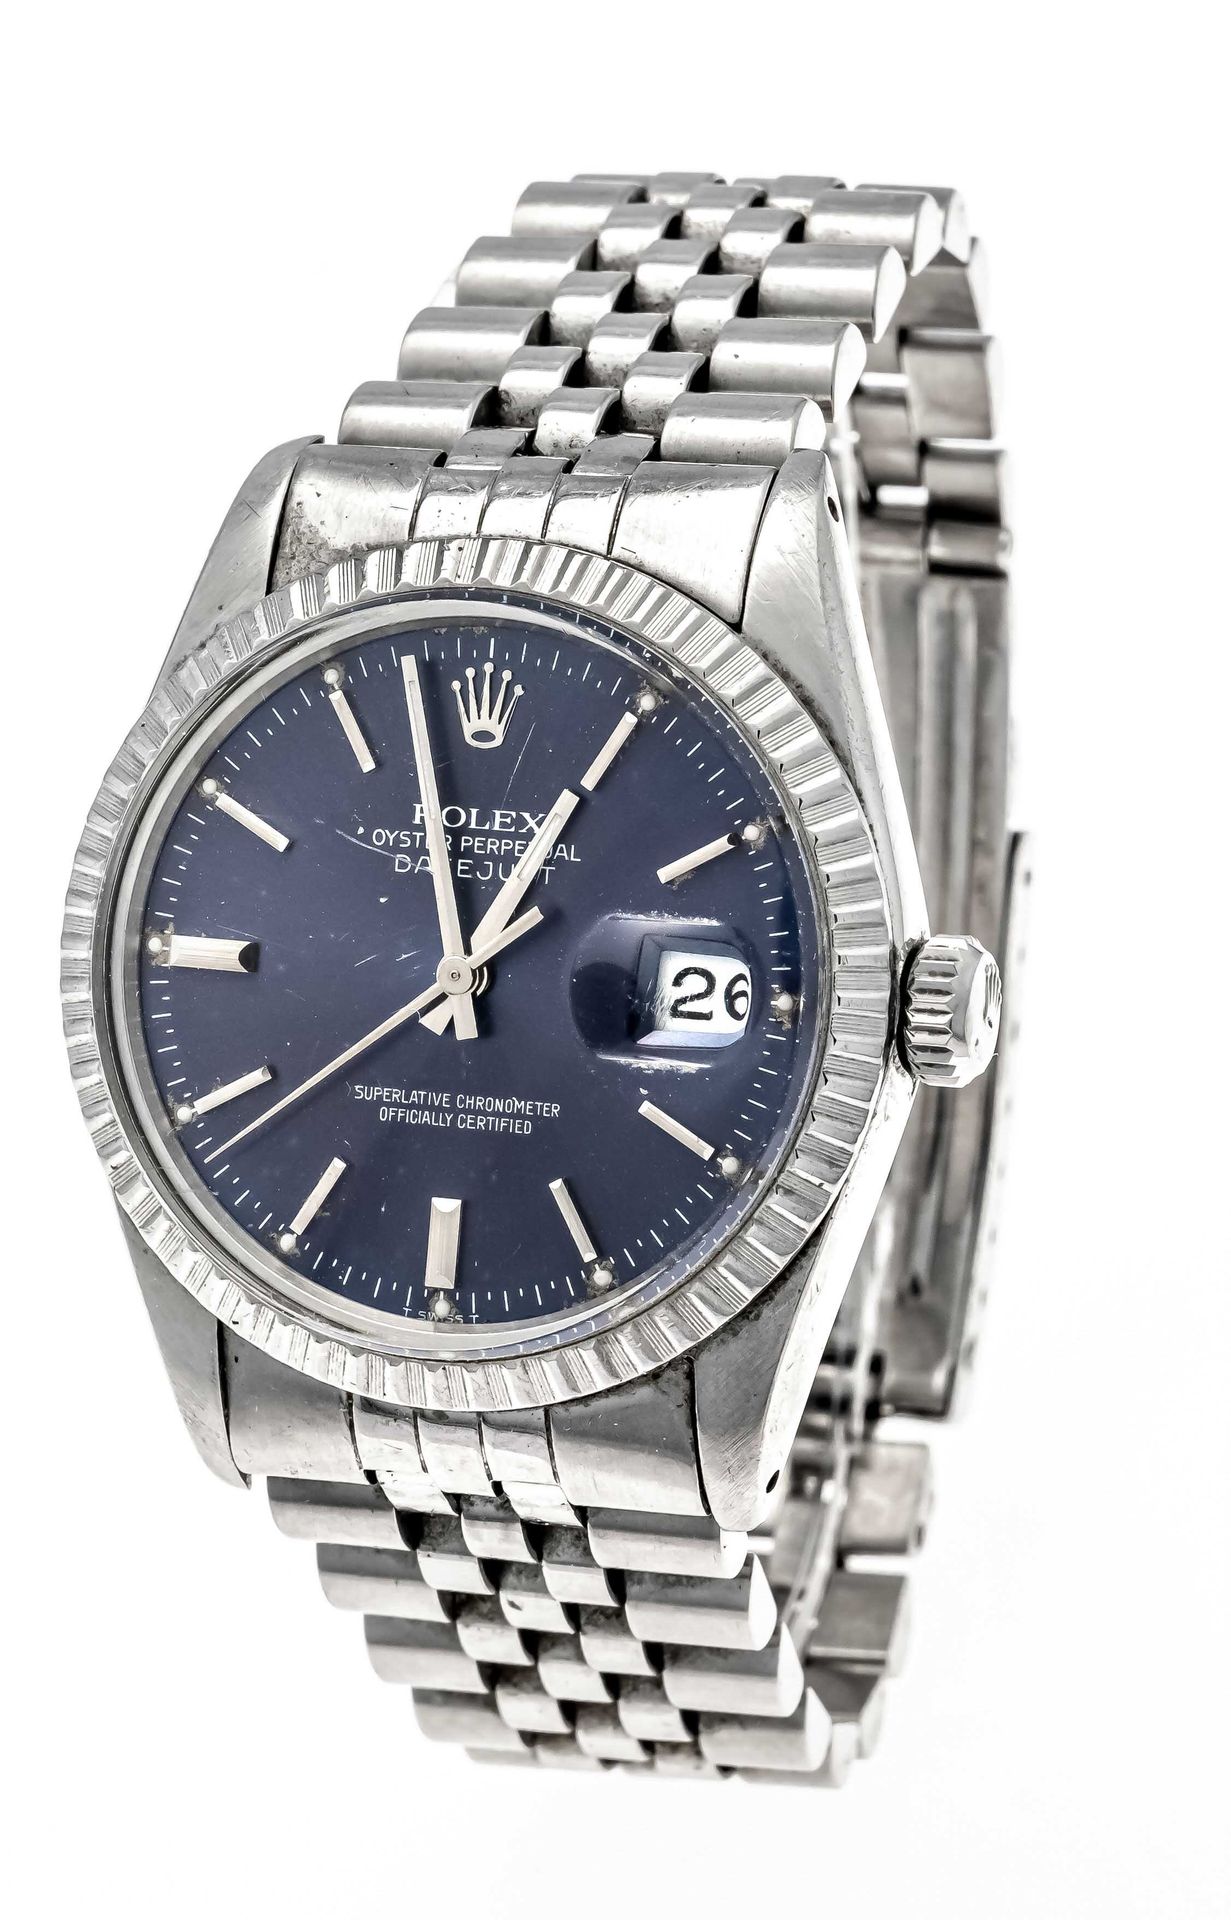 Null Rolex Datejust, Oyster Perpetual, Chronometer, Ref. 16030, um 1980, Stahlge&hellip;